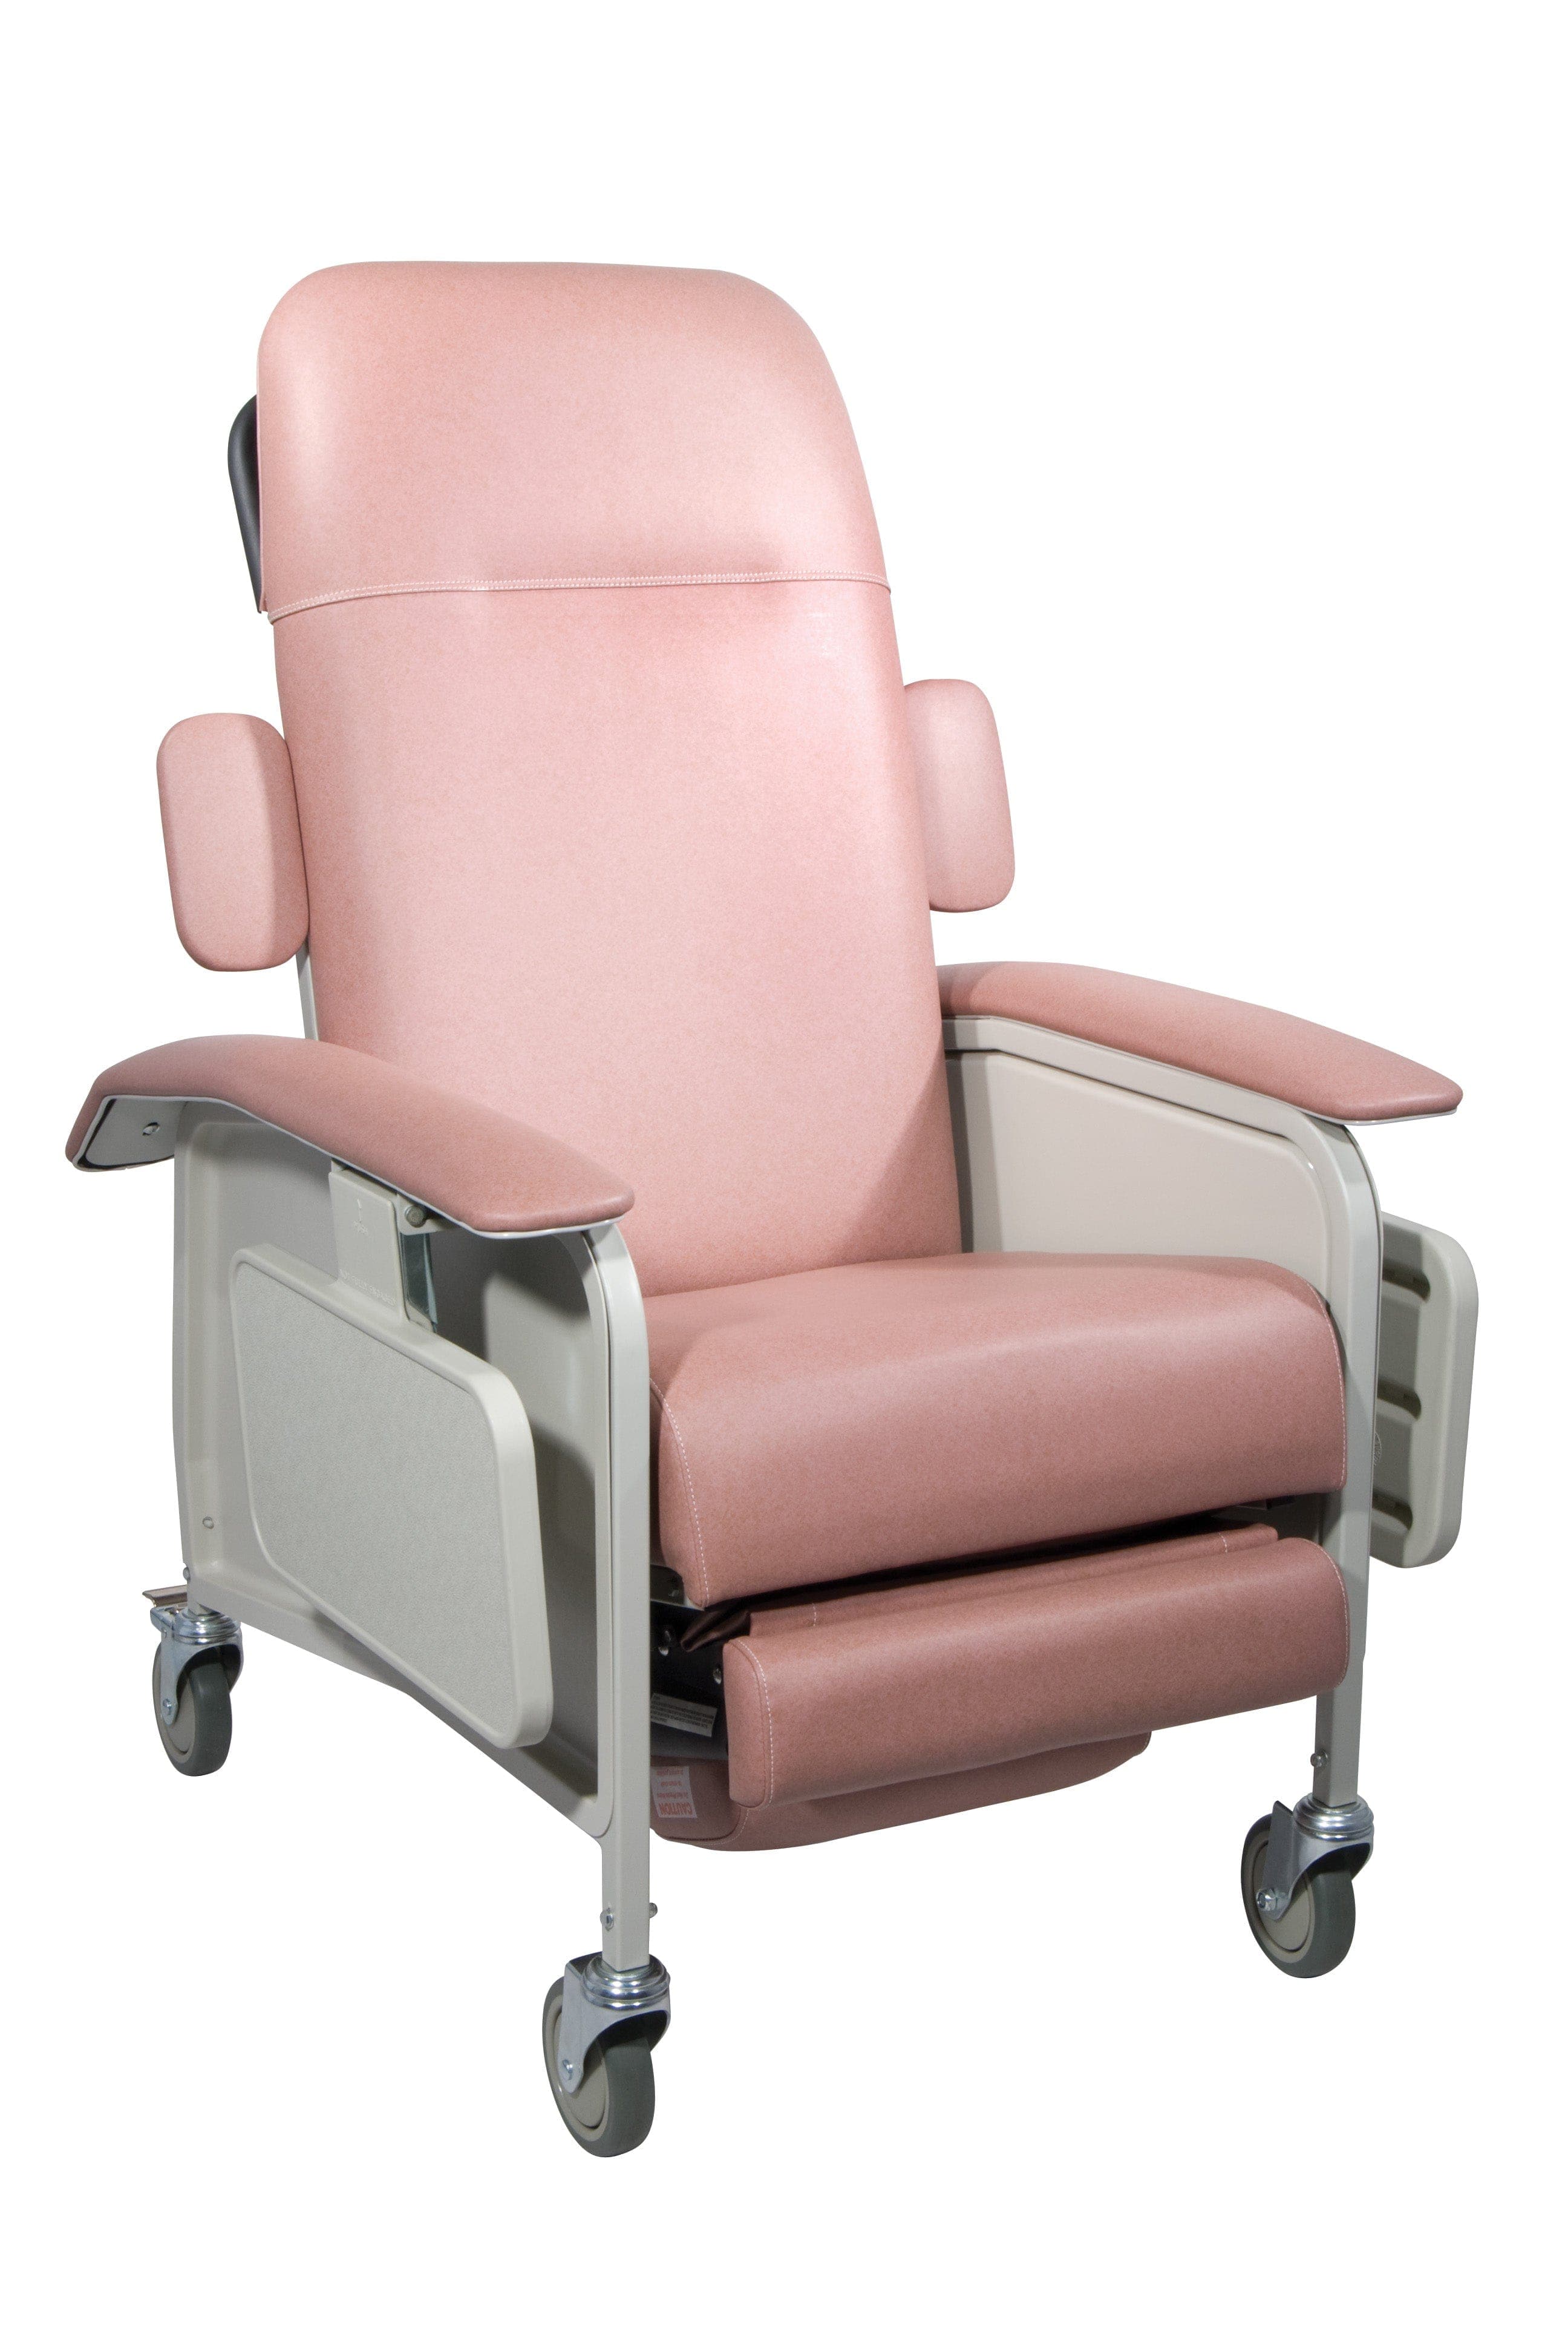 Drive Medical Drive Medical Clinical Care Geri Chair Recliner d577-r